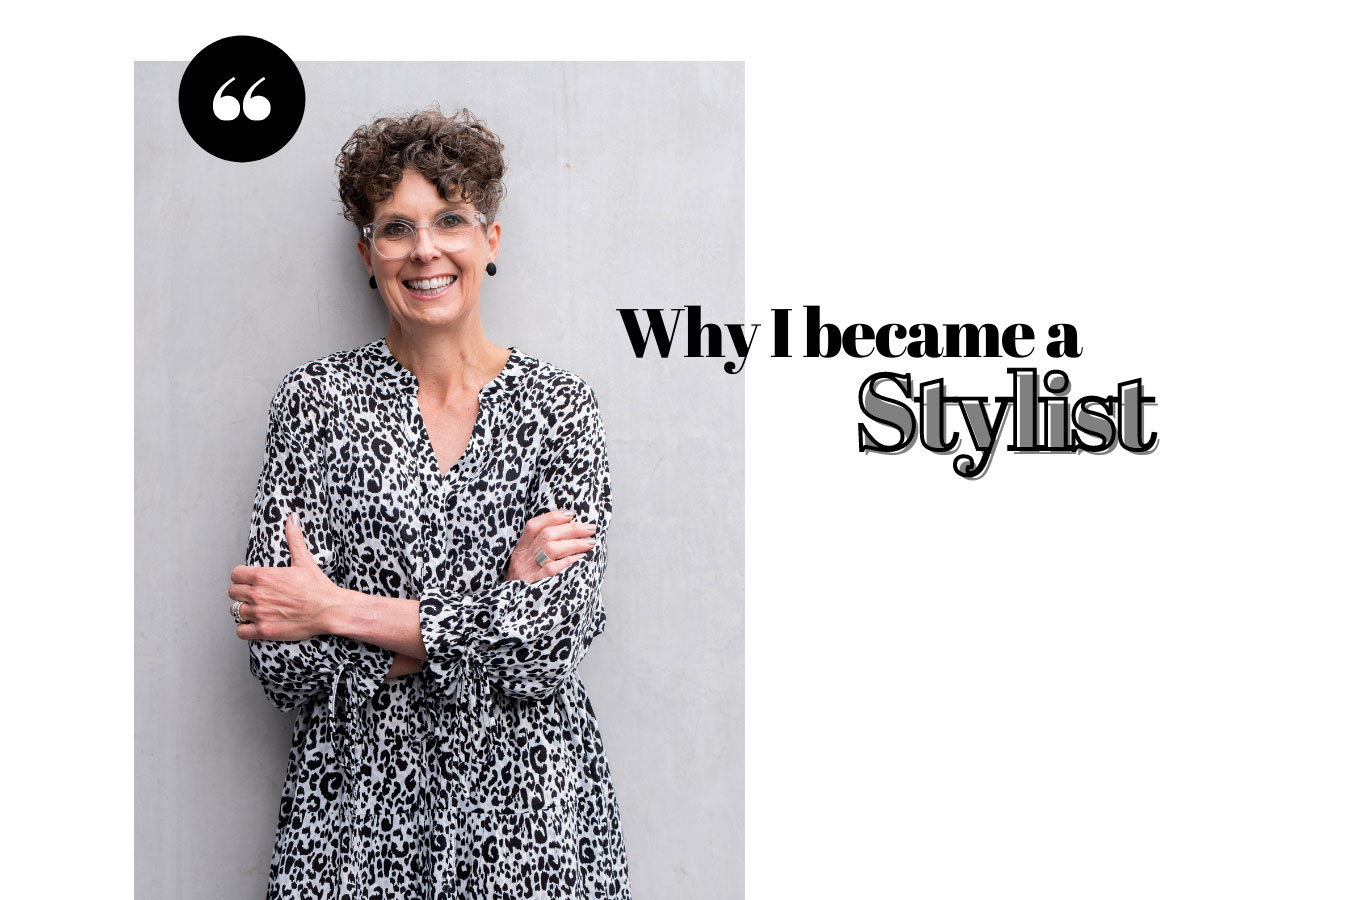 Why I became a Stylist